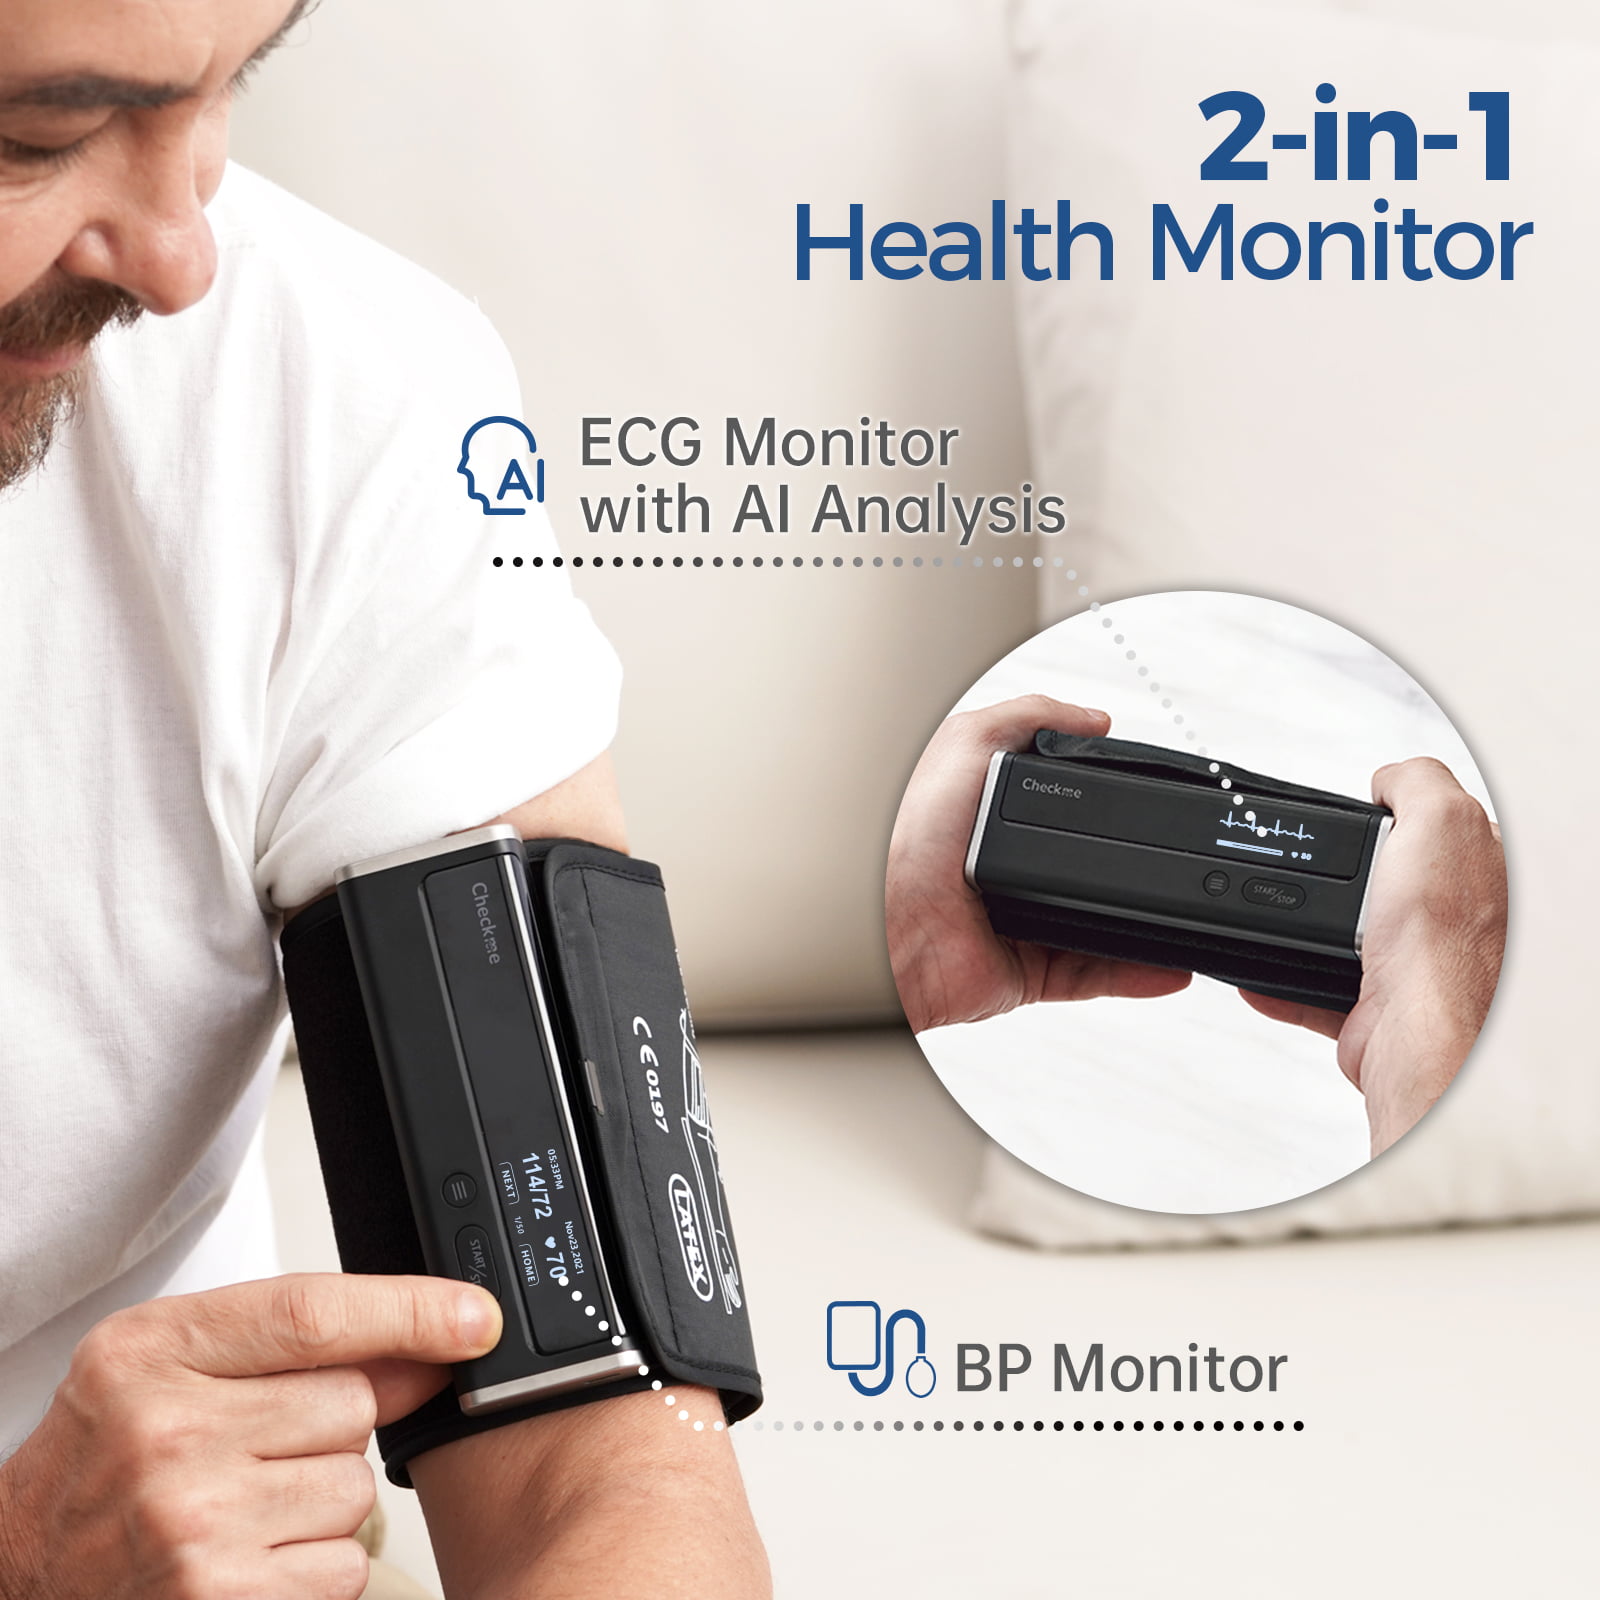 How to Use the Complete 2-in1 Blood Pressure + EKG Monitor) 